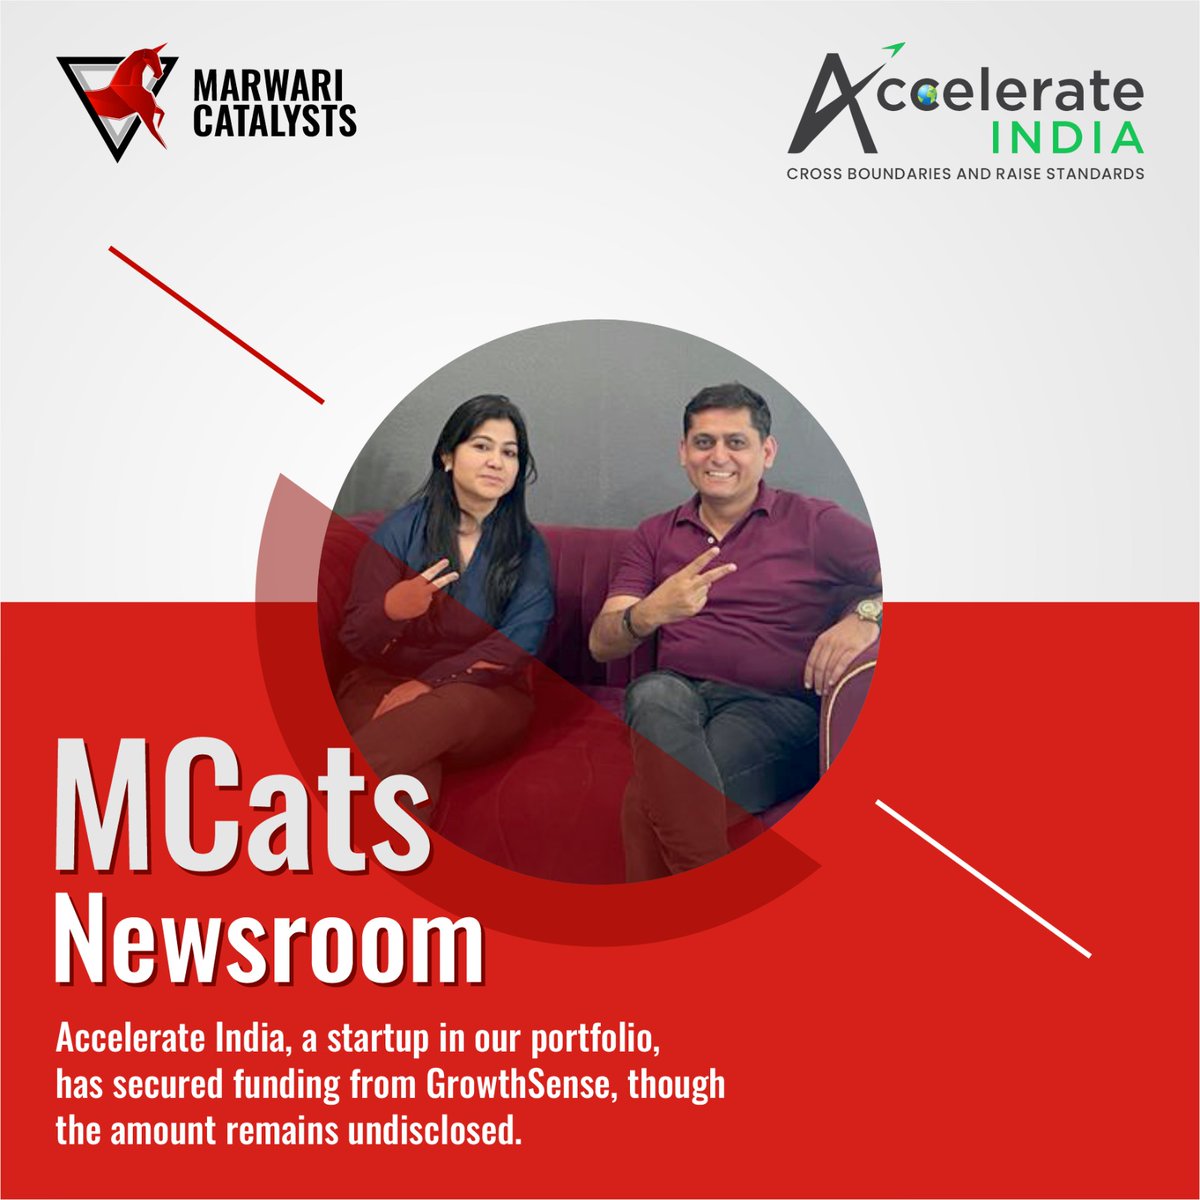 Accelerate India a key player in our portfolio, has recently garnered investment from @GrowthSense, although the specifics of the amount are undisclosed.

#MarwariCatalysts #startupnews #startupindia #investments #mentorship #startupaccelerator #inc42 #yourstory #entrepreneurship